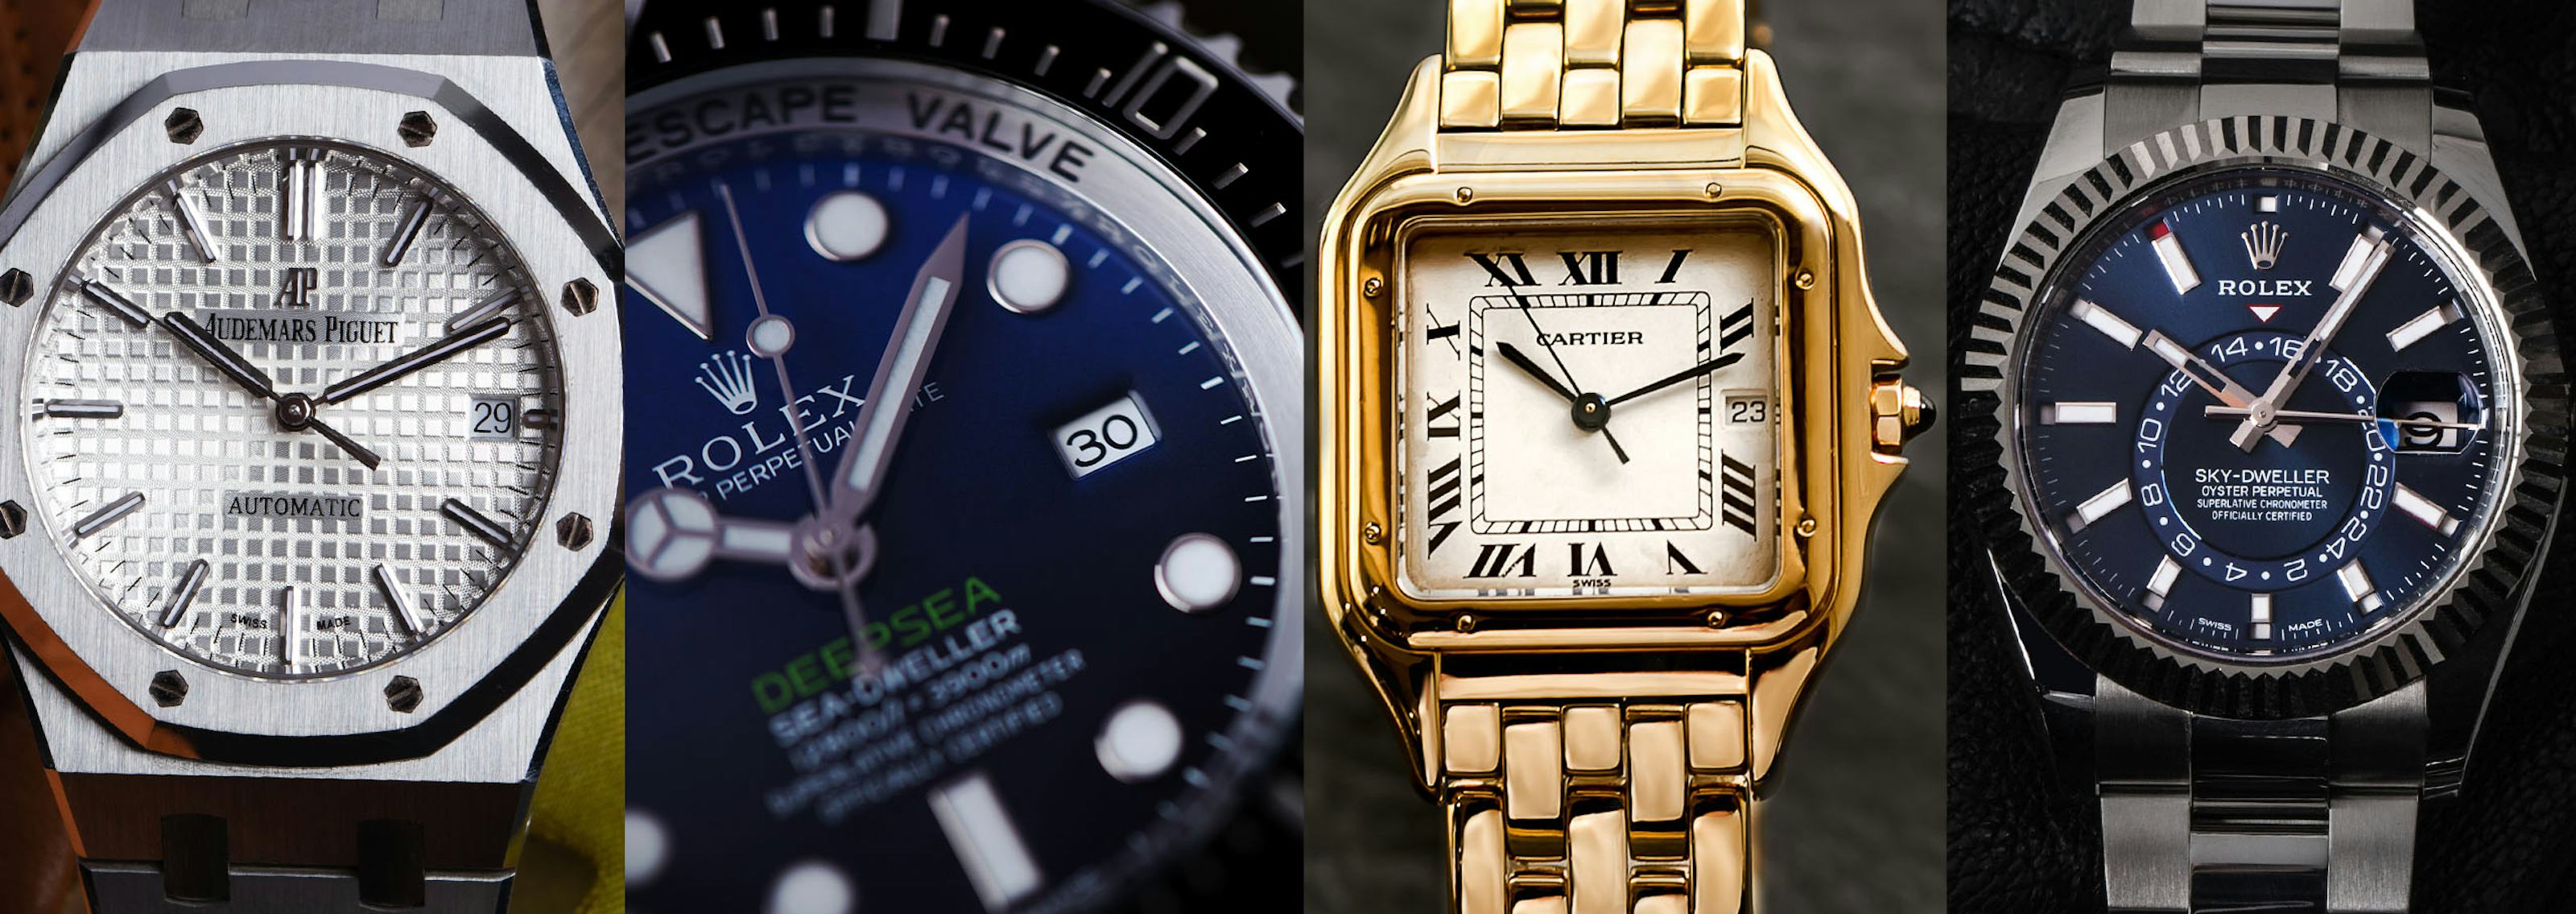 Iconic Celebrity Watches From Hollywood to Politicians